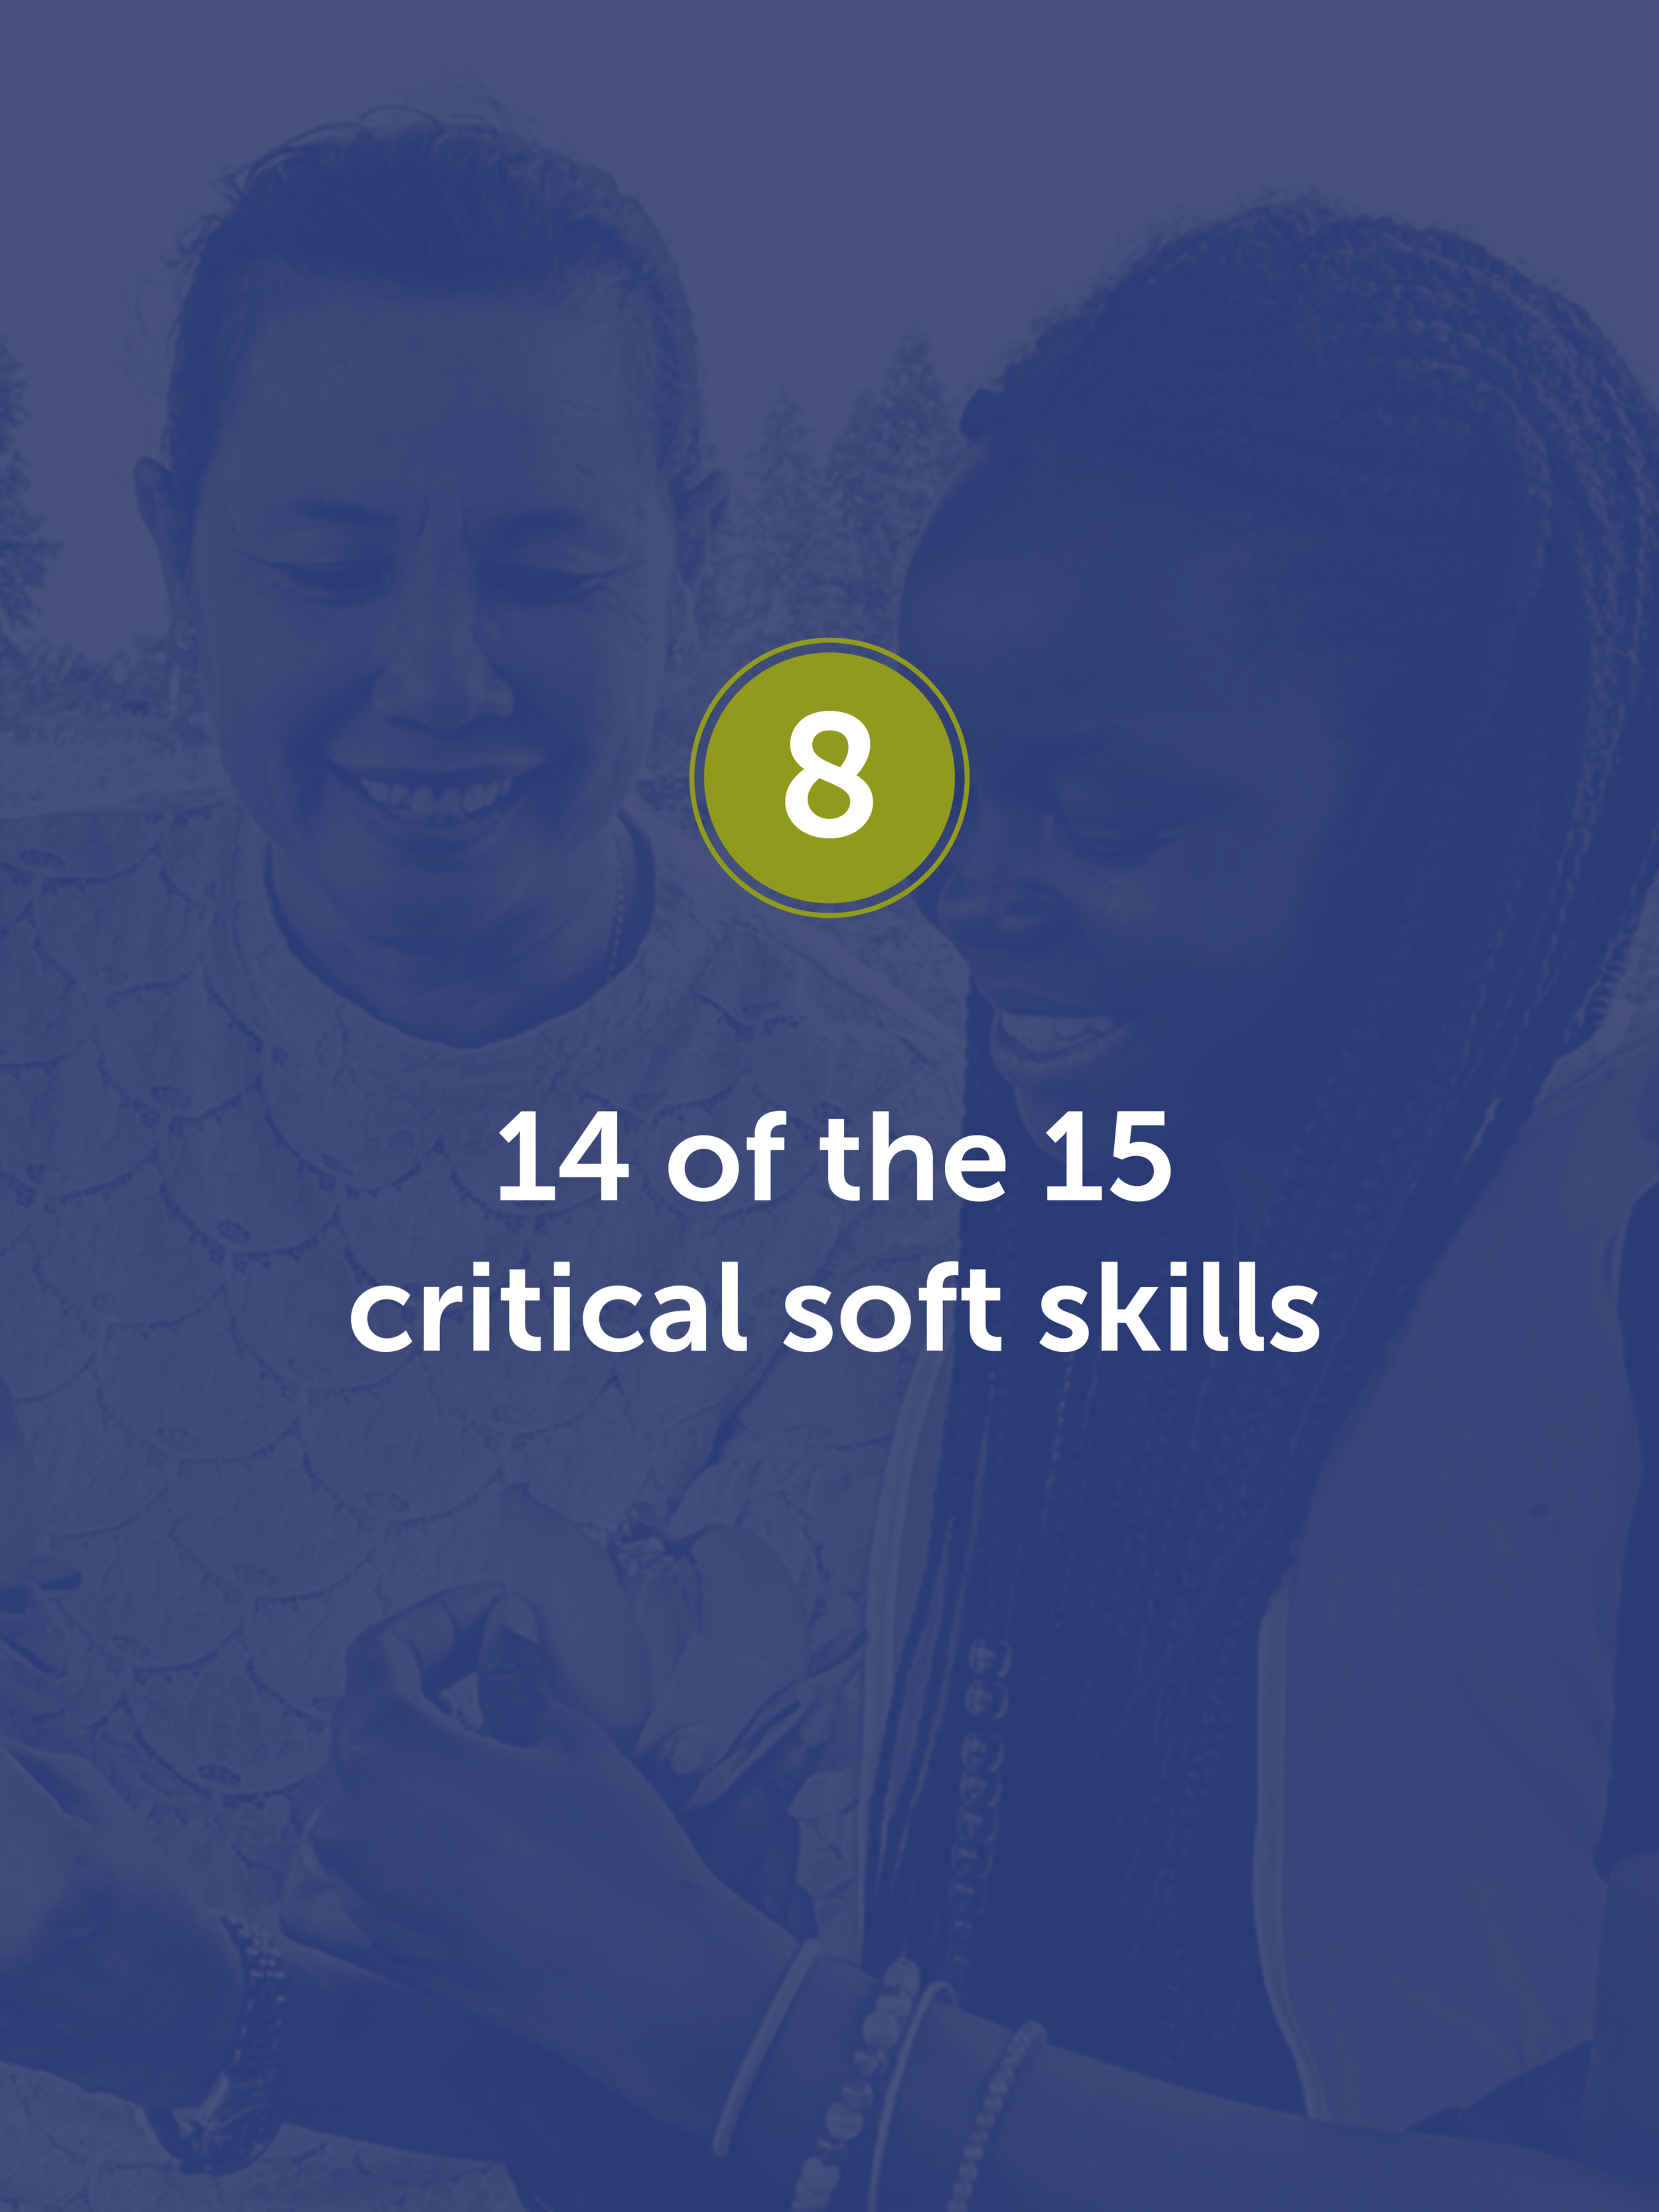 The majority of study abroad alumni reported positive skill gains  in 14 of the 15 soft and hard skills identified by employers as most desired competencies.